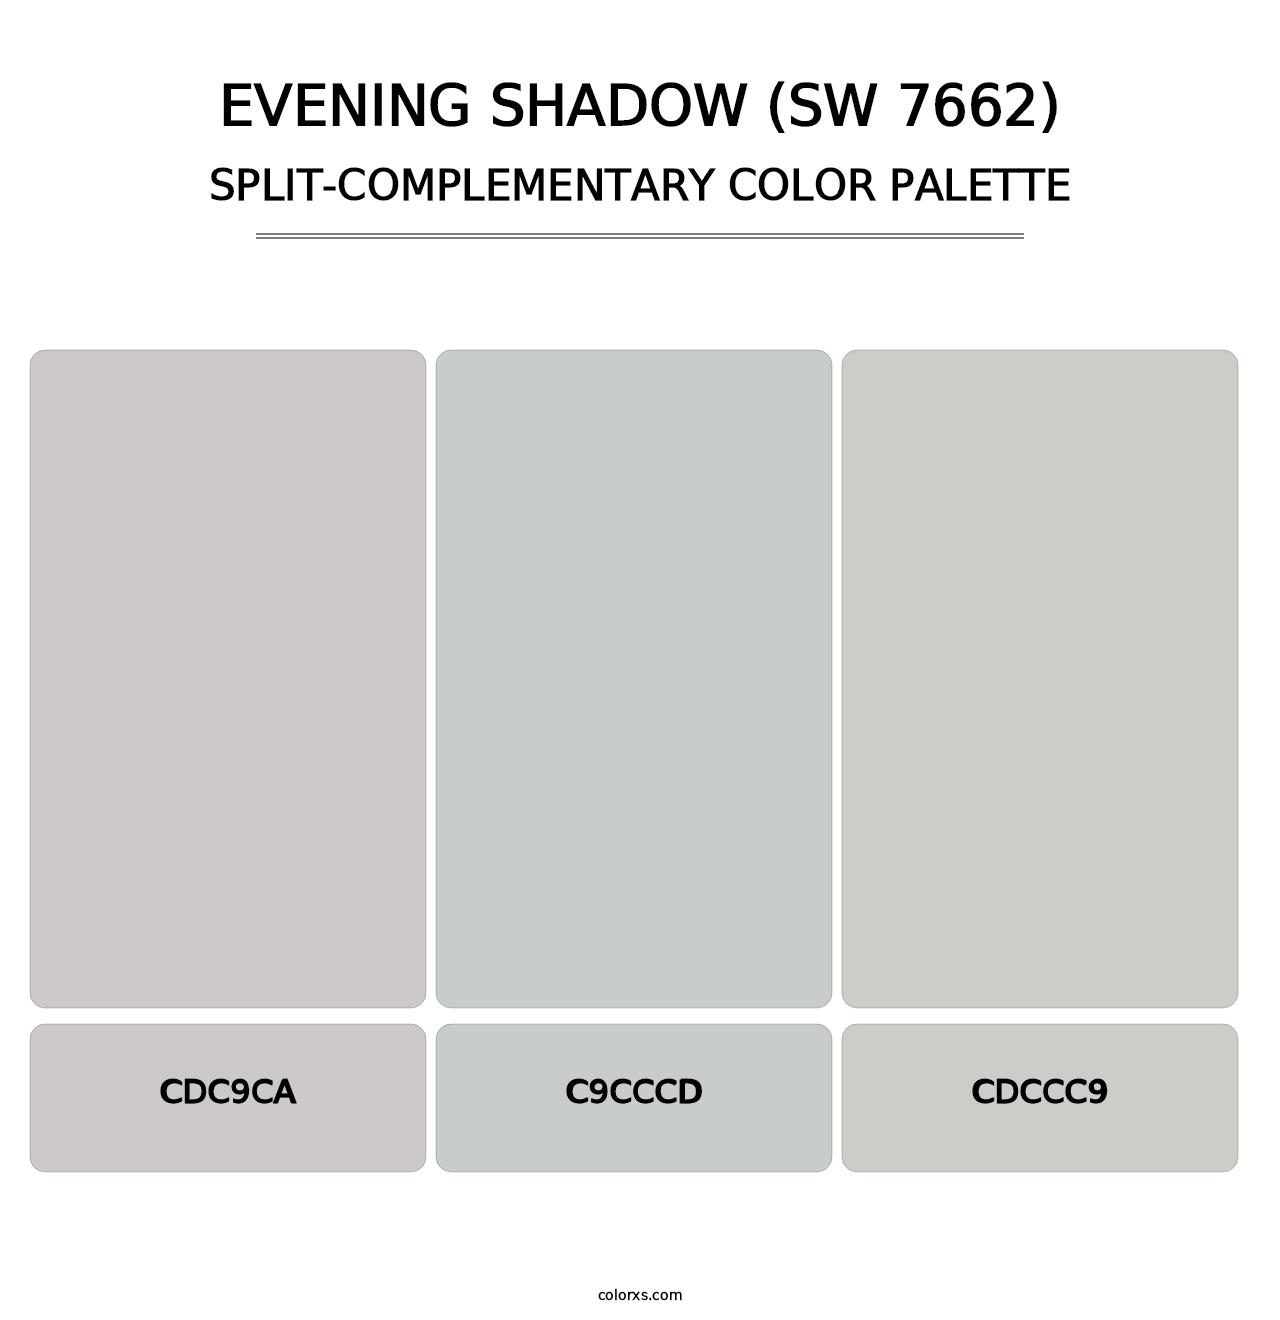 Evening Shadow (SW 7662) - Split-Complementary Color Palette